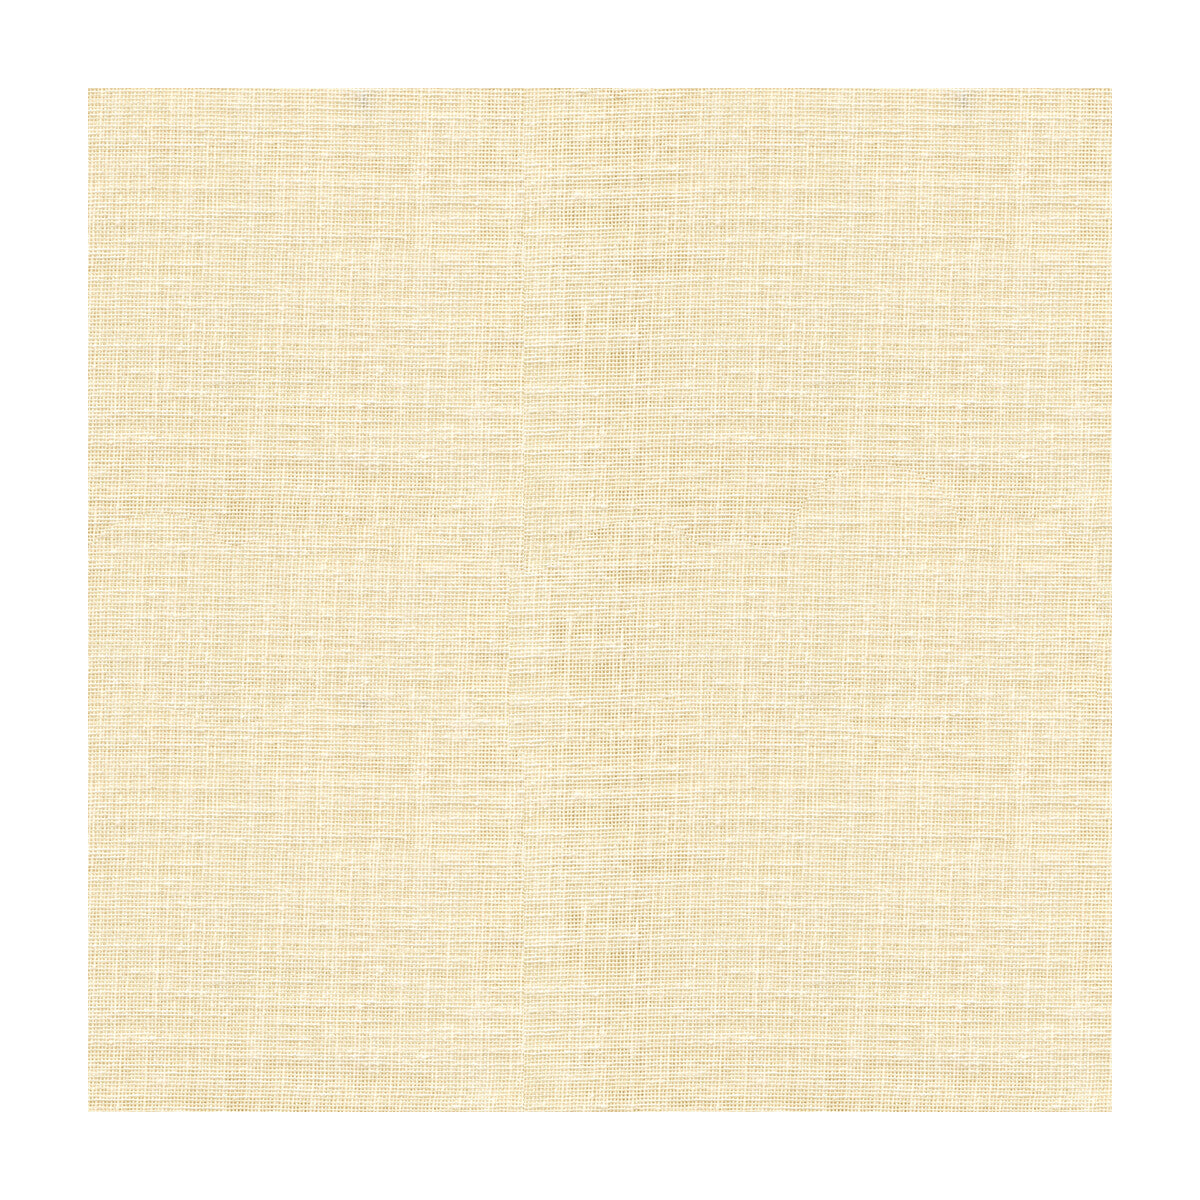 Kravet Contract fabric in 4153-1 color - pattern 4153.1.0 - by Kravet Contract in the Sheer Outlook collection